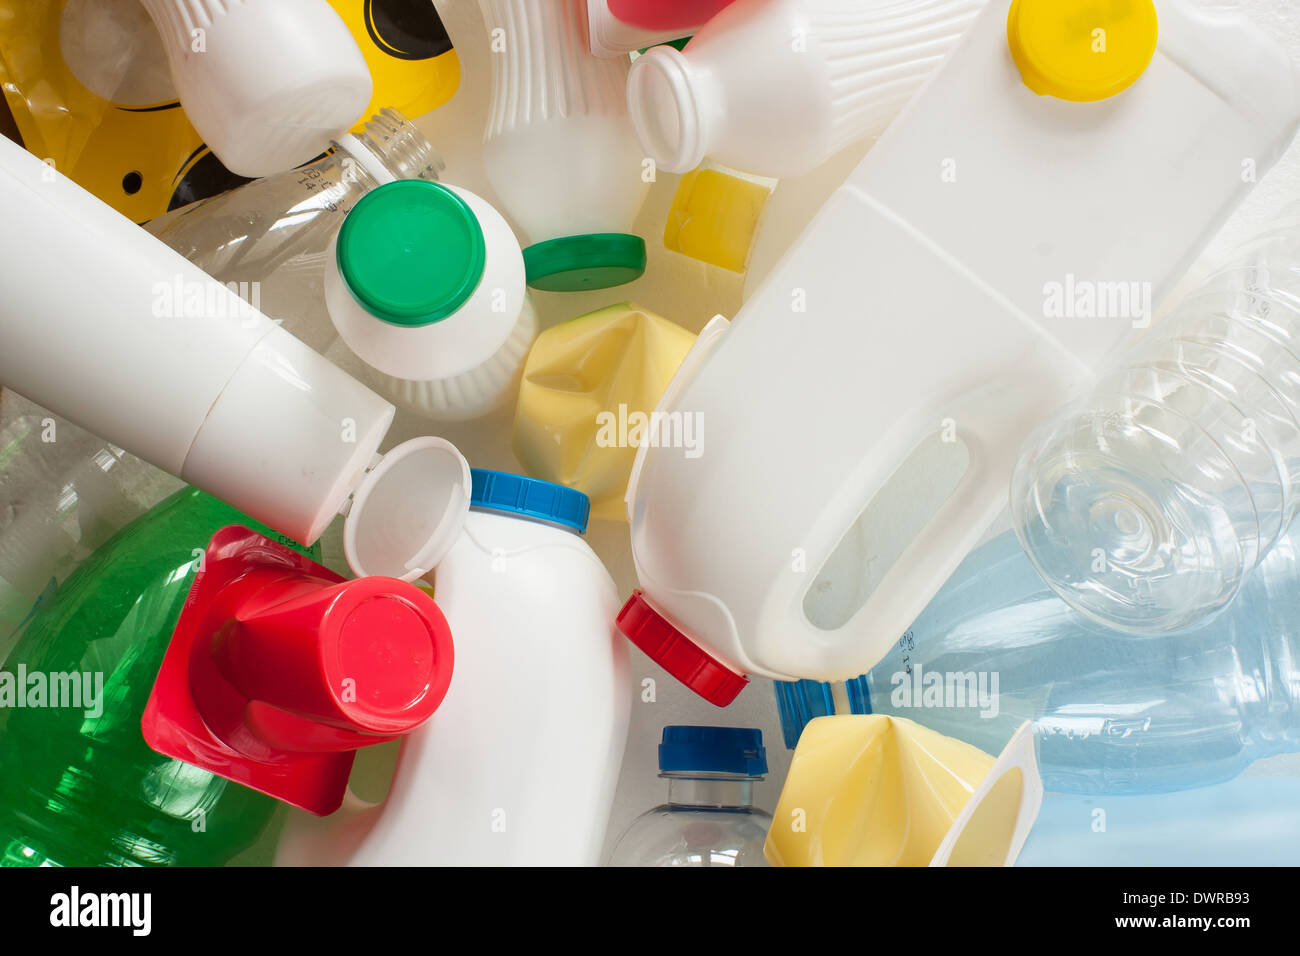 Segregated plastic wastes ready to recycling Stock Photo